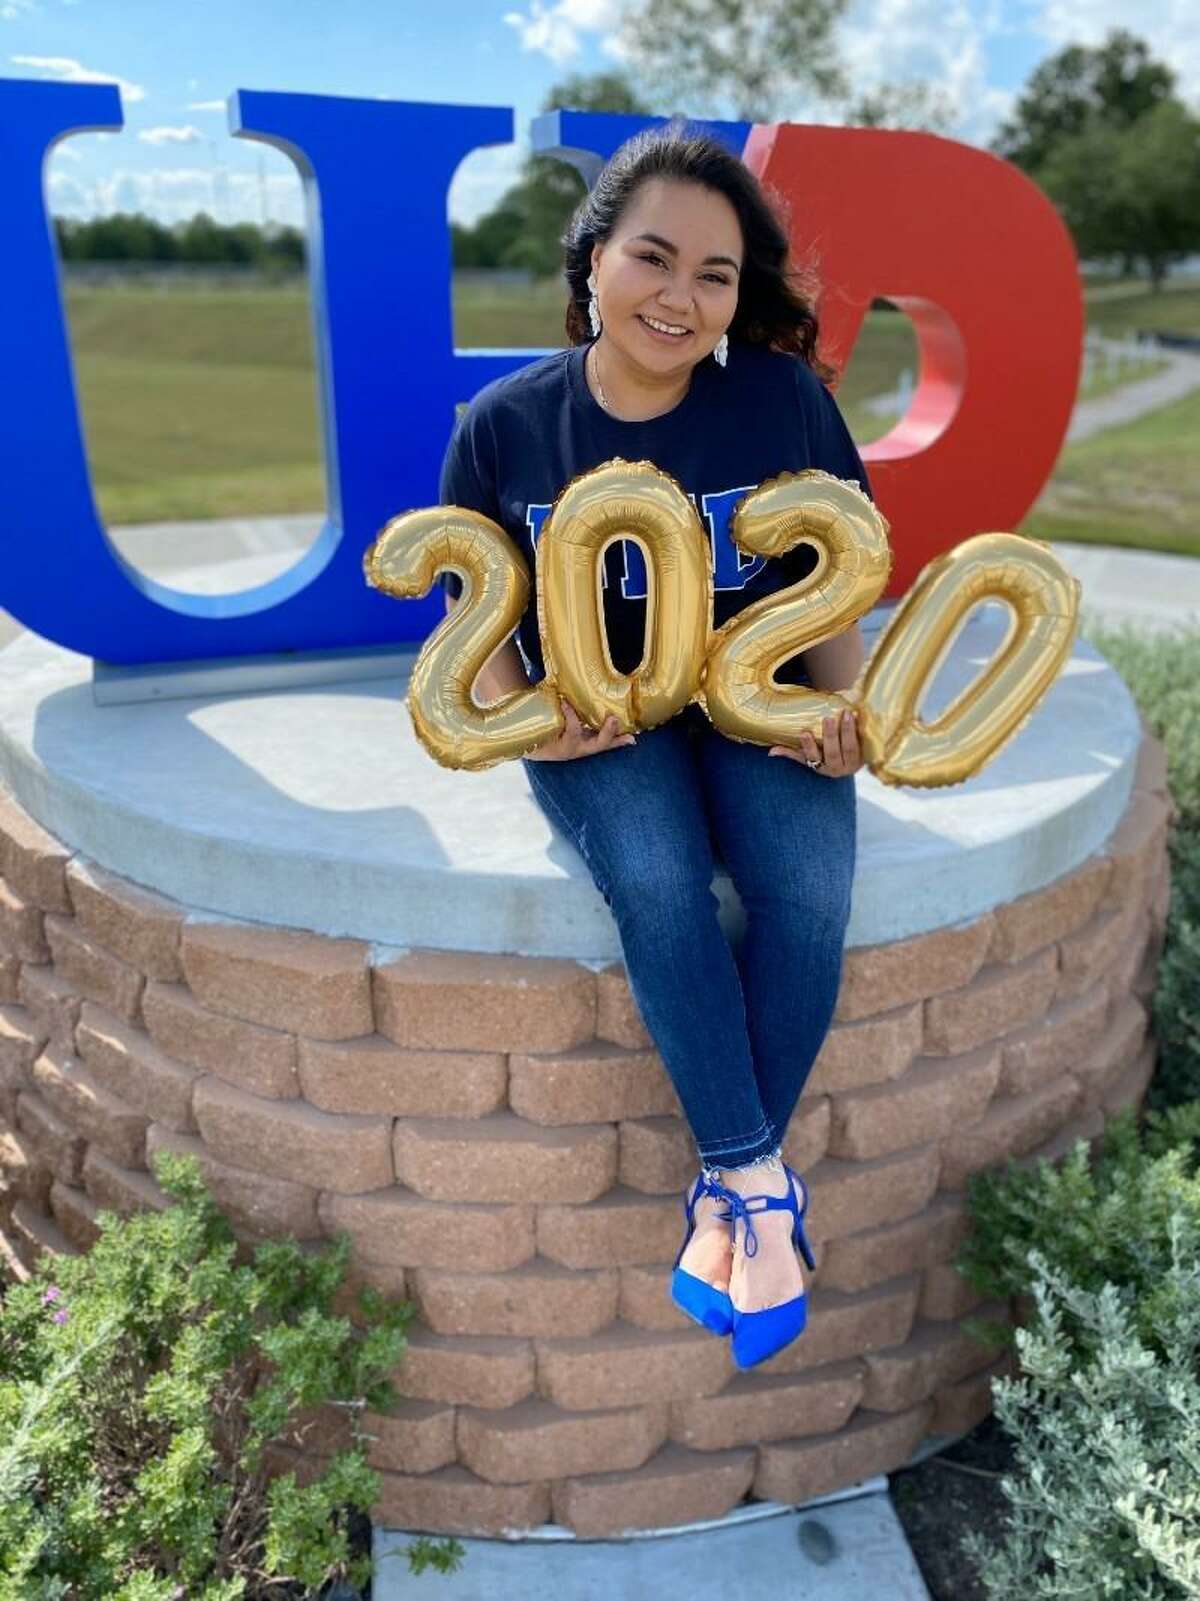 Cynthia Andrade is a 2020 graduate of the University of Houston-Downtown.